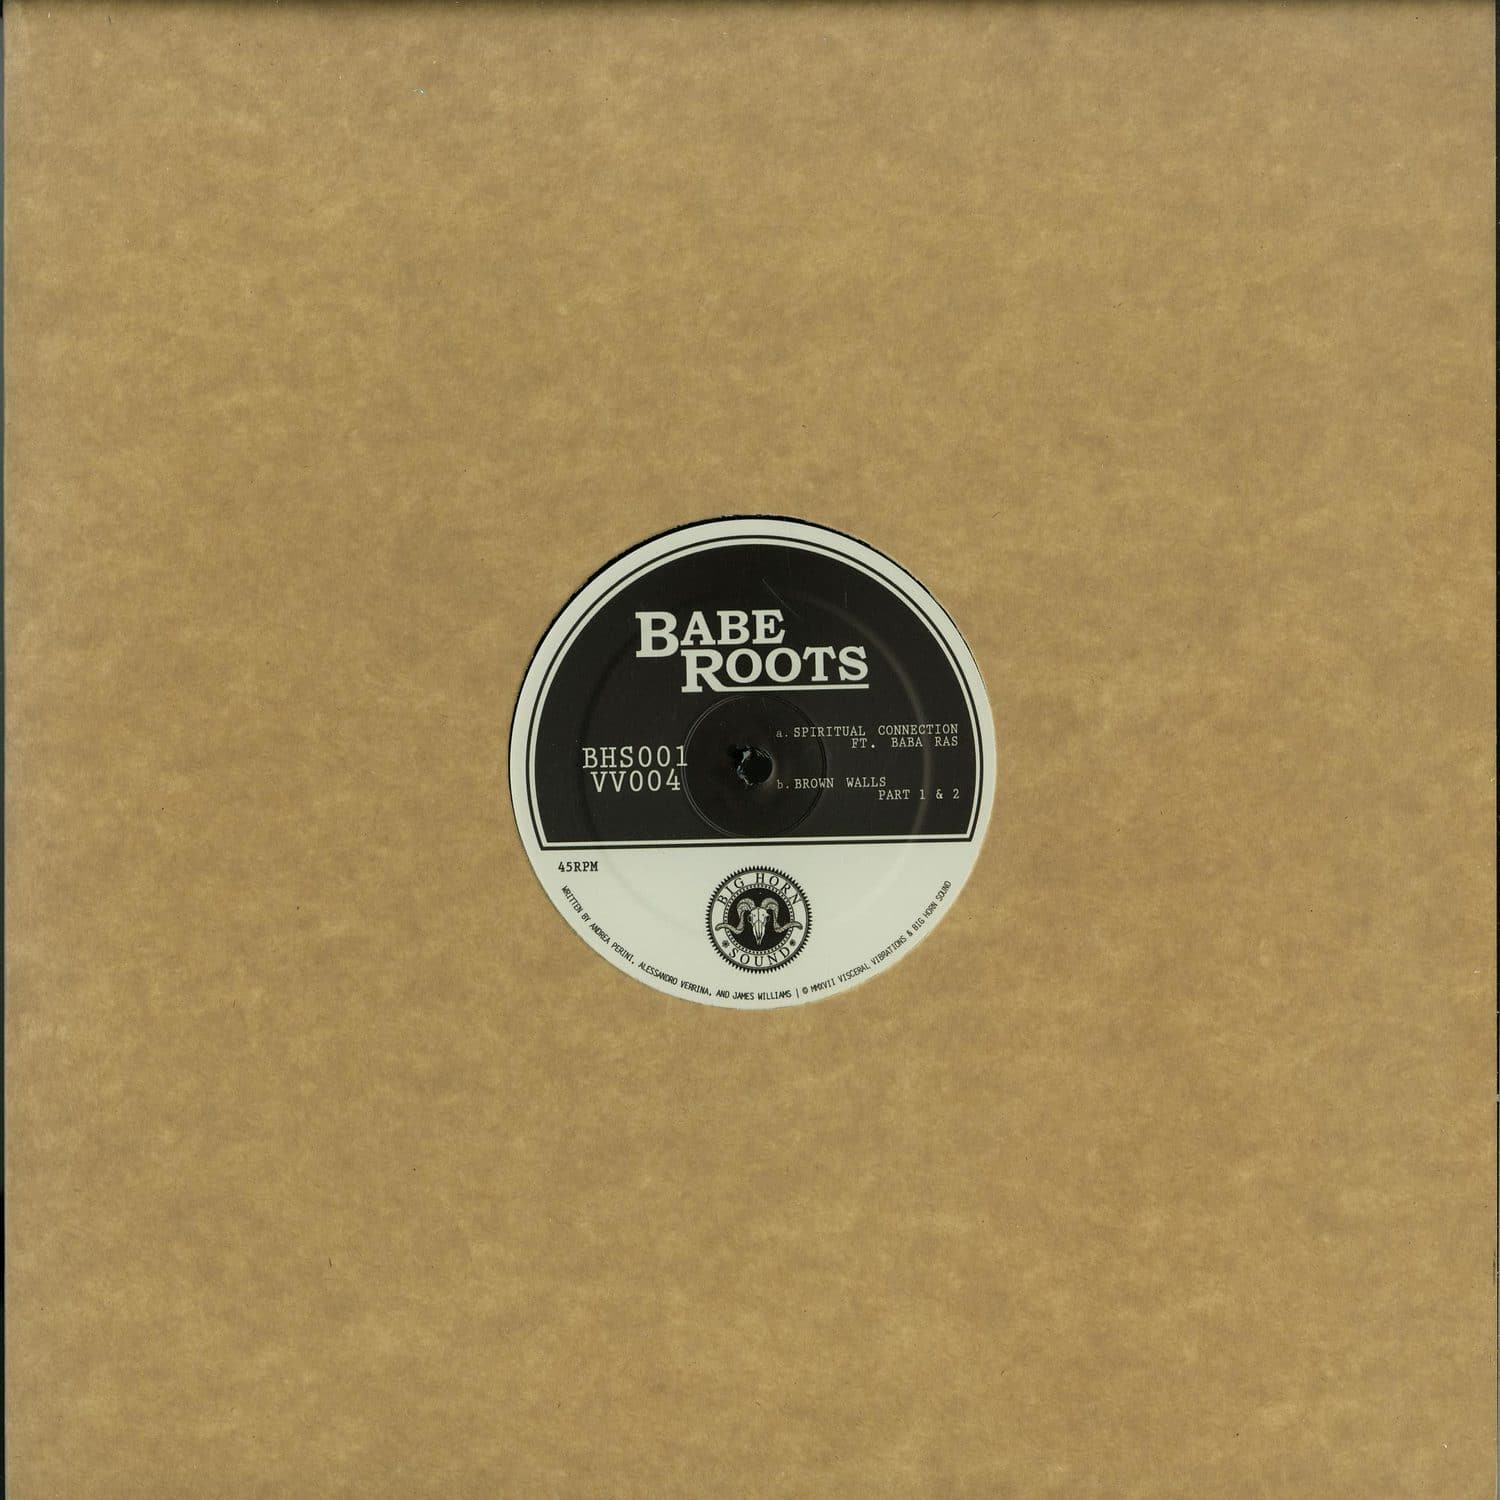 Babe Roots - SPIRITUAL CONNECTION / BROWN WALLS